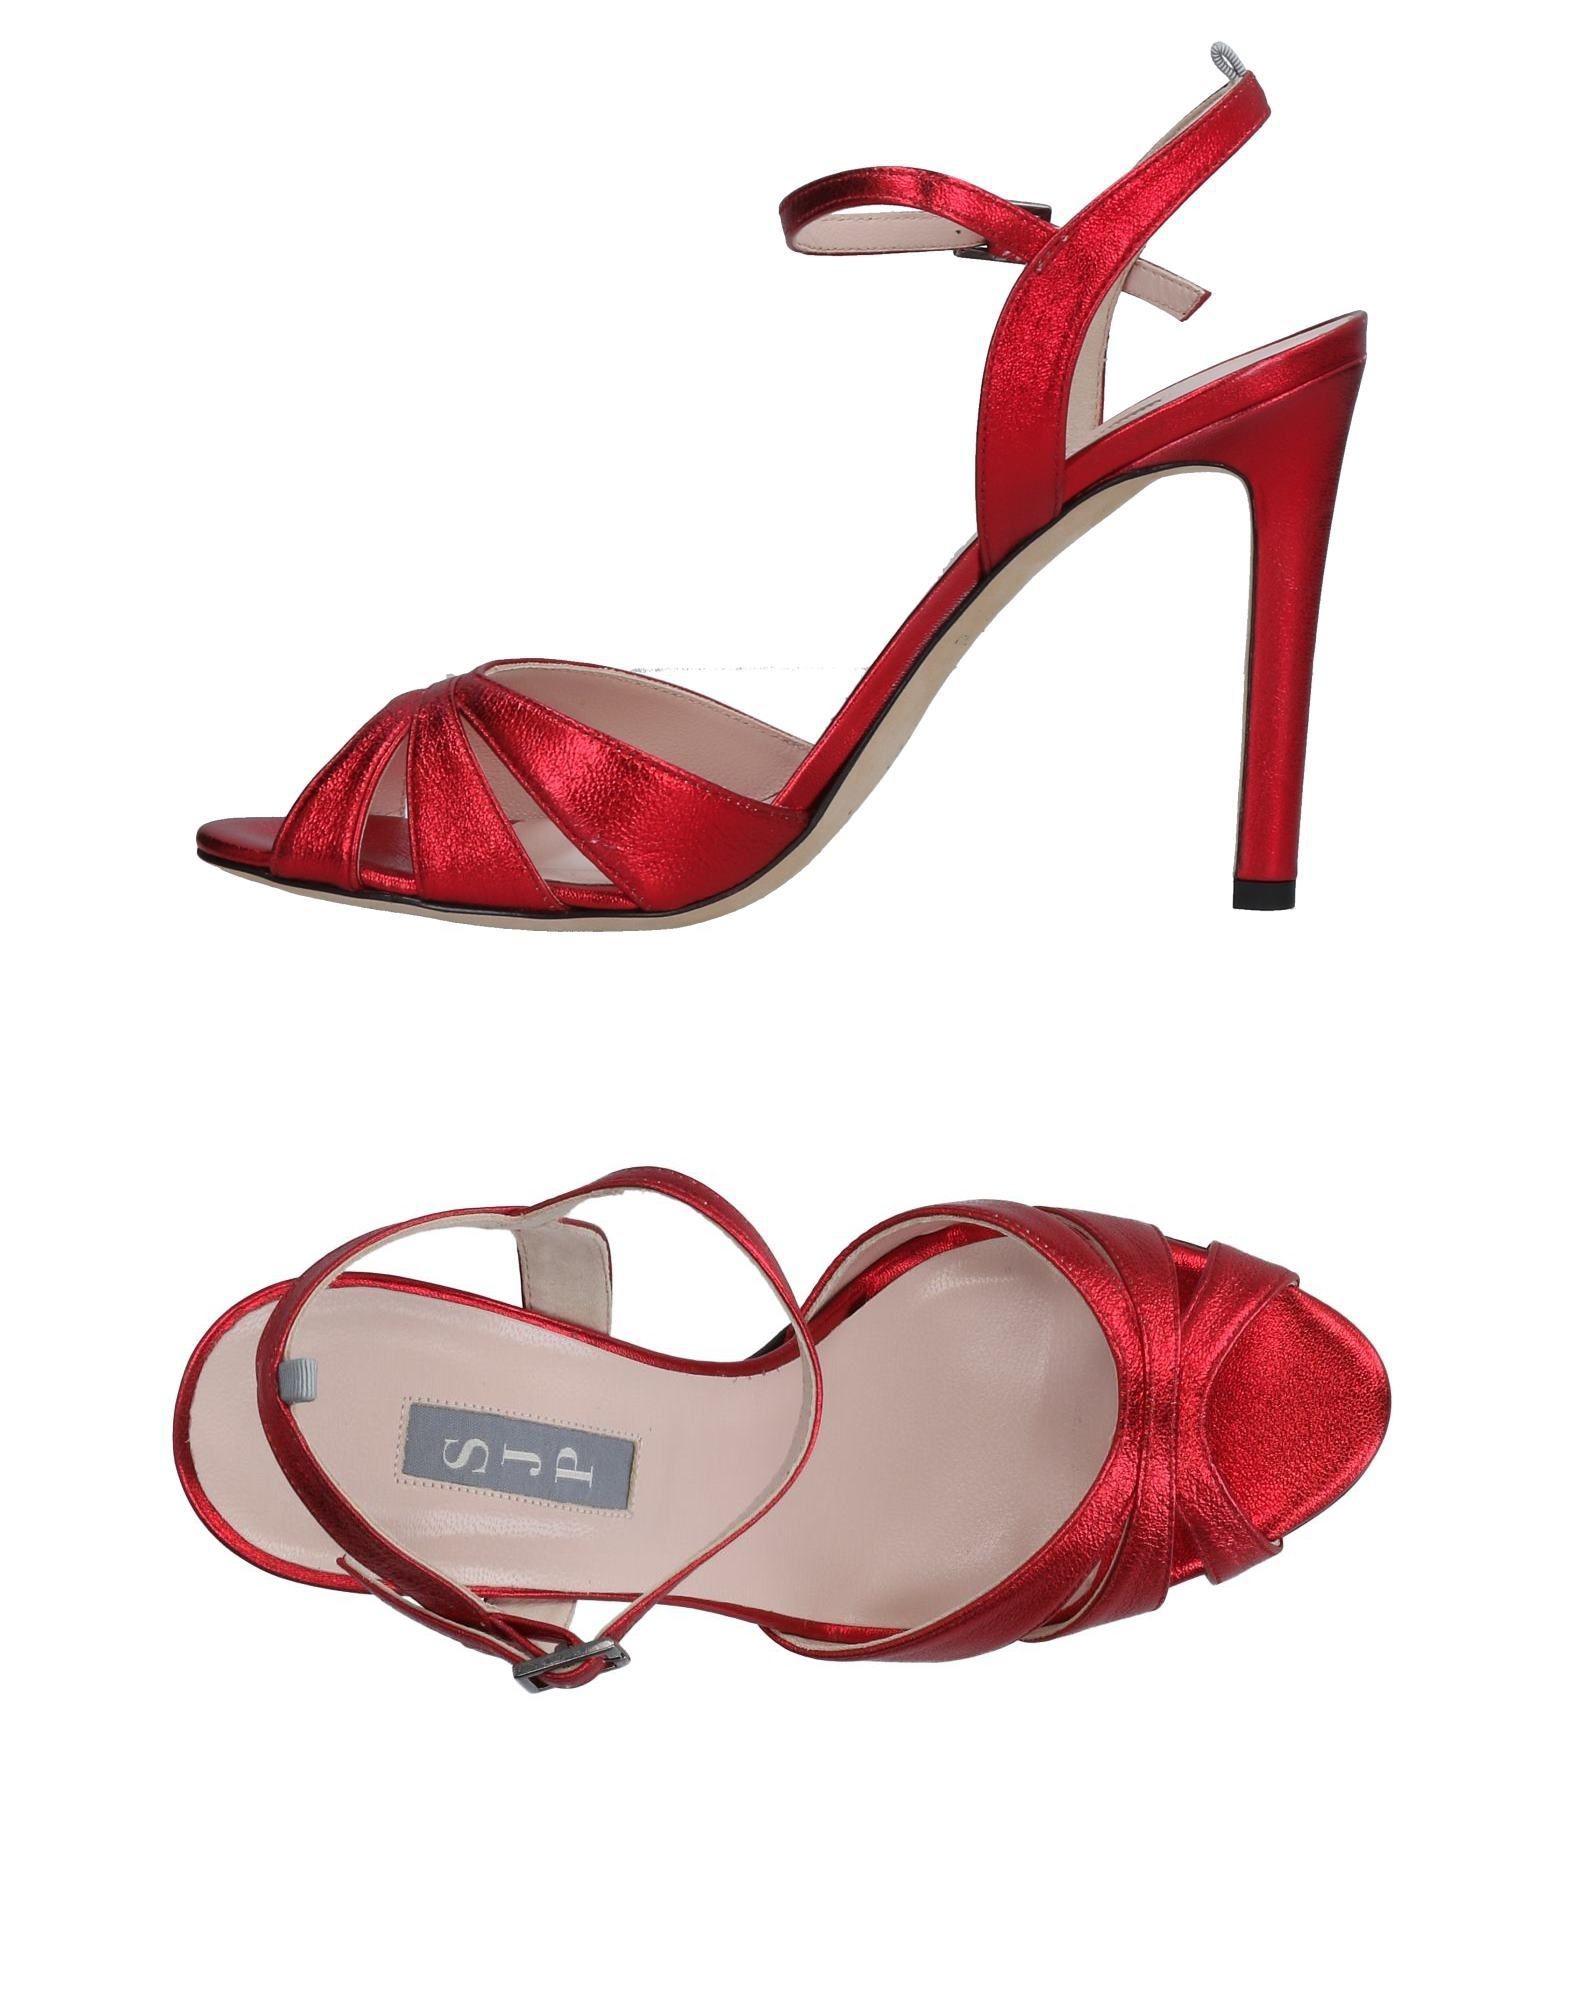 Lyst - SJP by Sarah Jessica Parker Sandals in Red - Save 70%